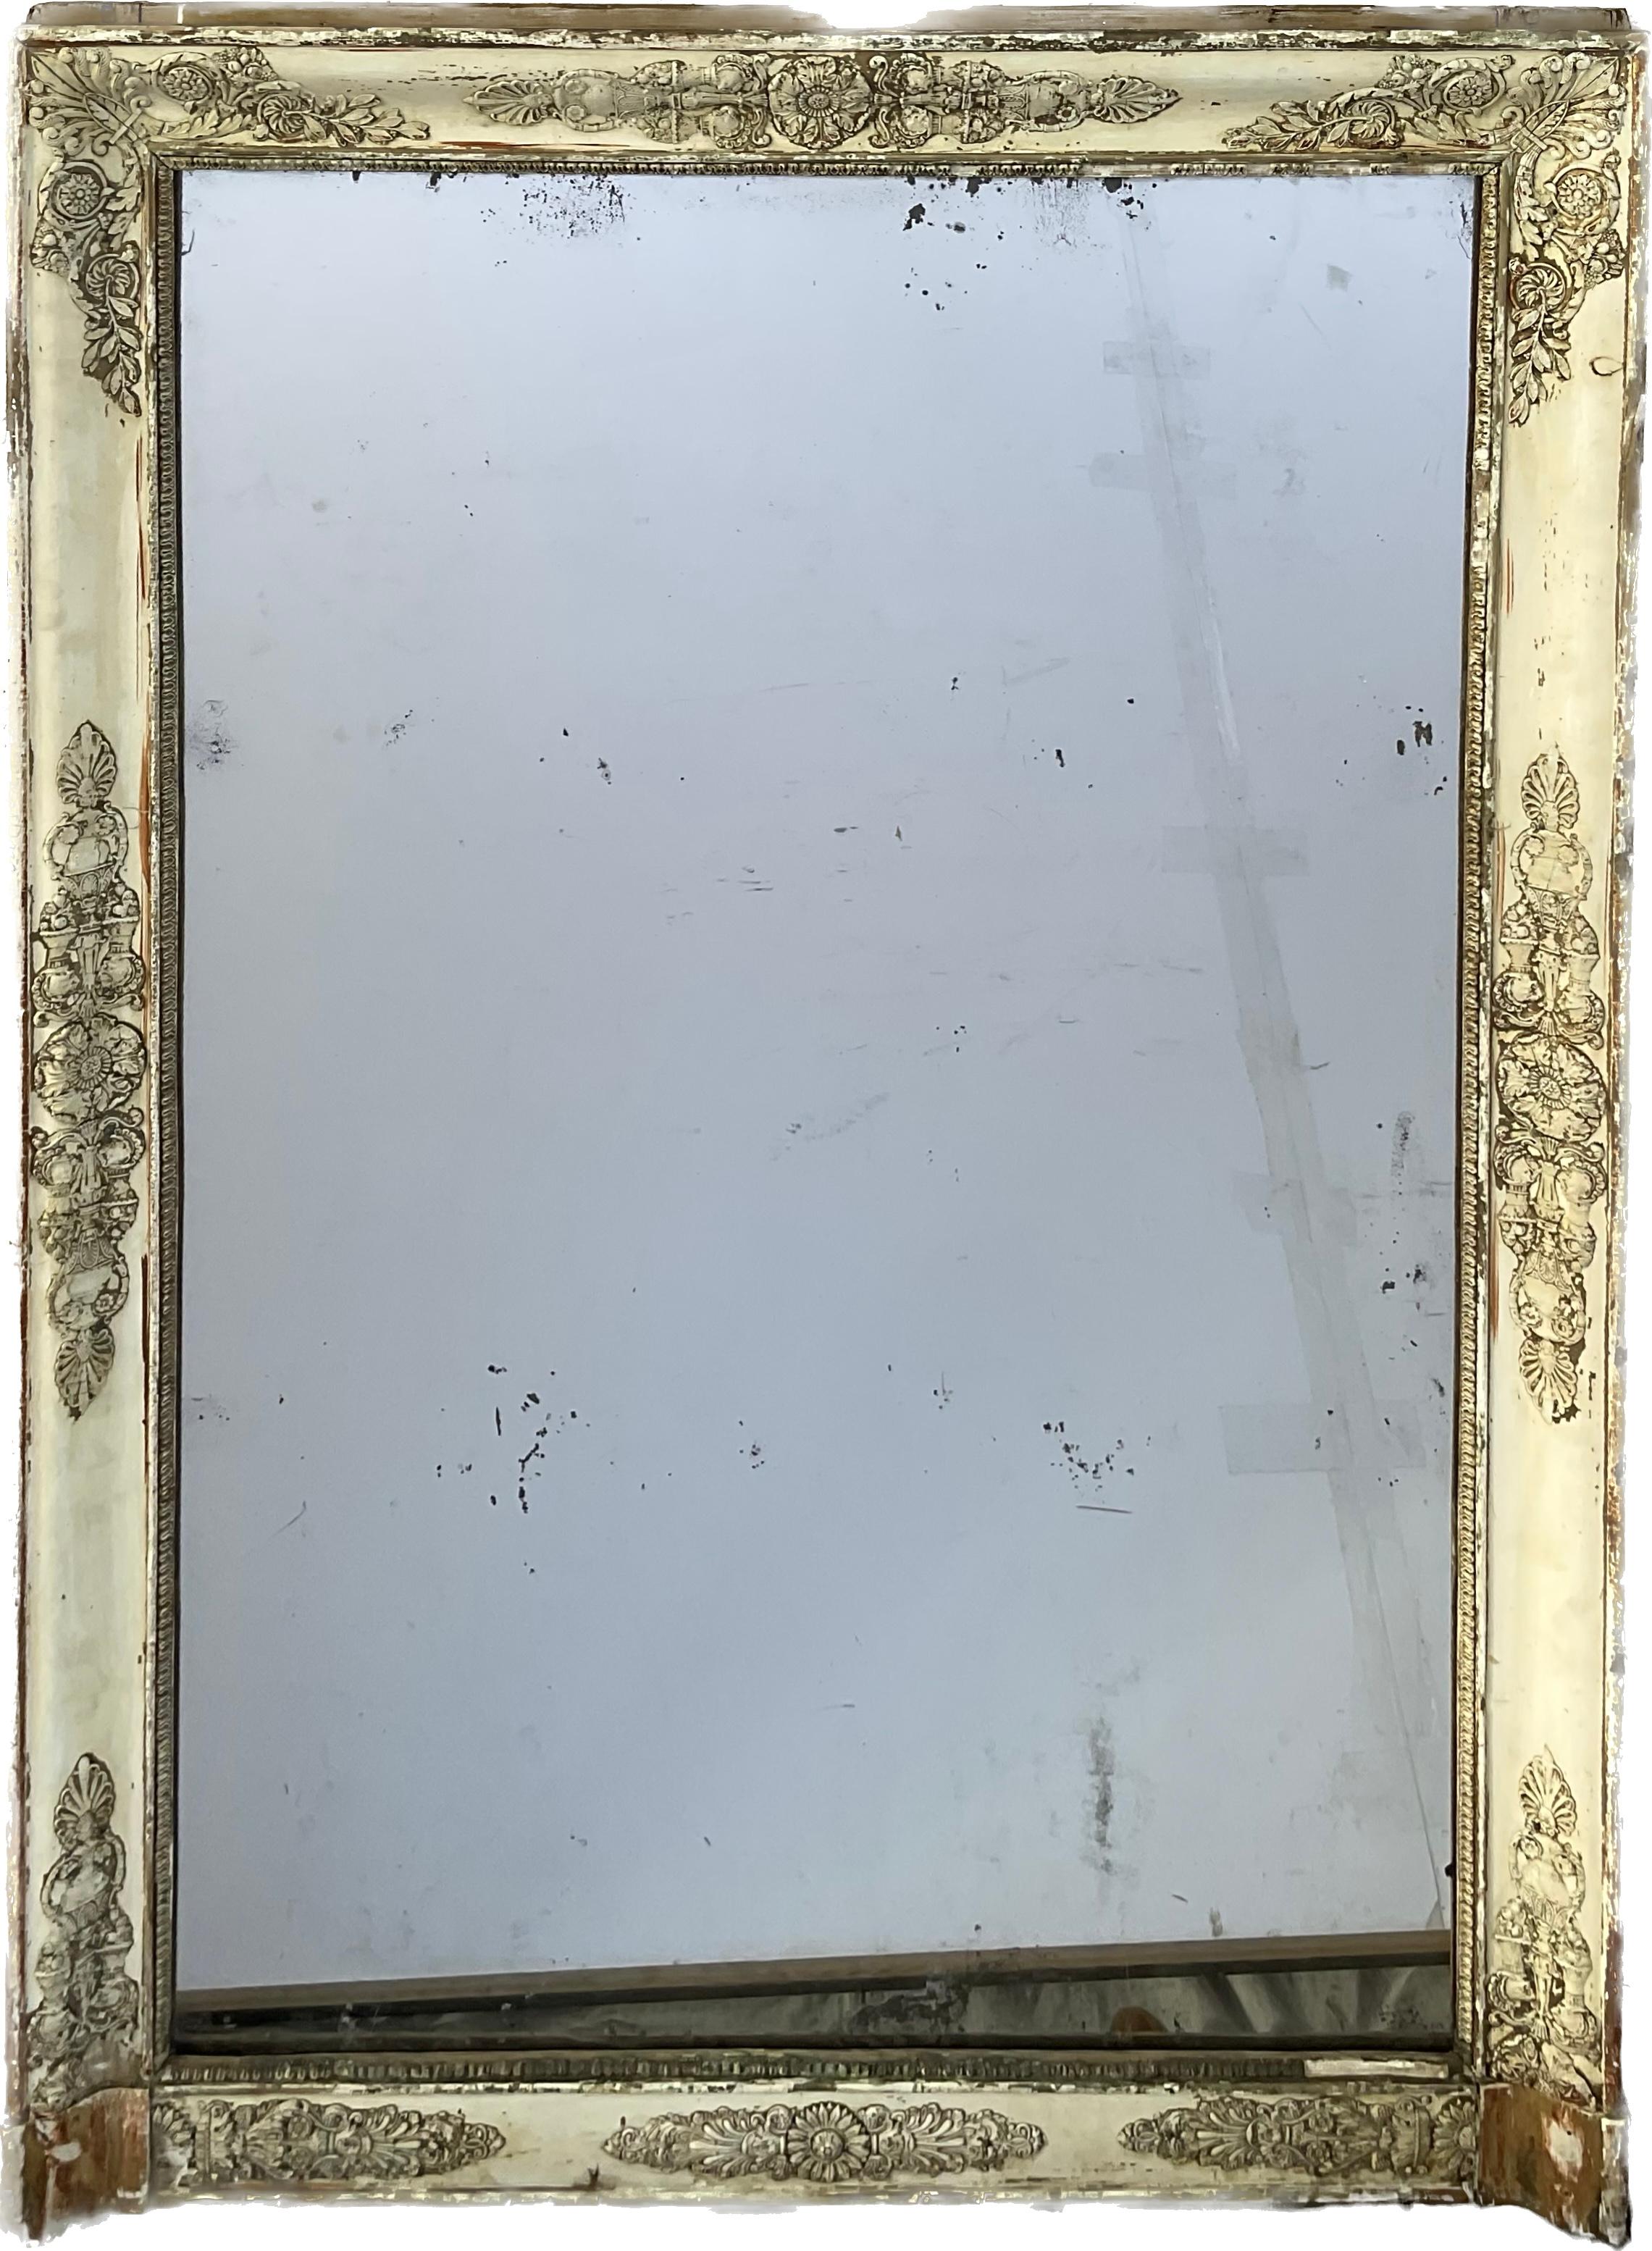 Large French Empire Mirror with Worn Gold Gilt Finish In Fair Condition For Sale In Bradenton, FL